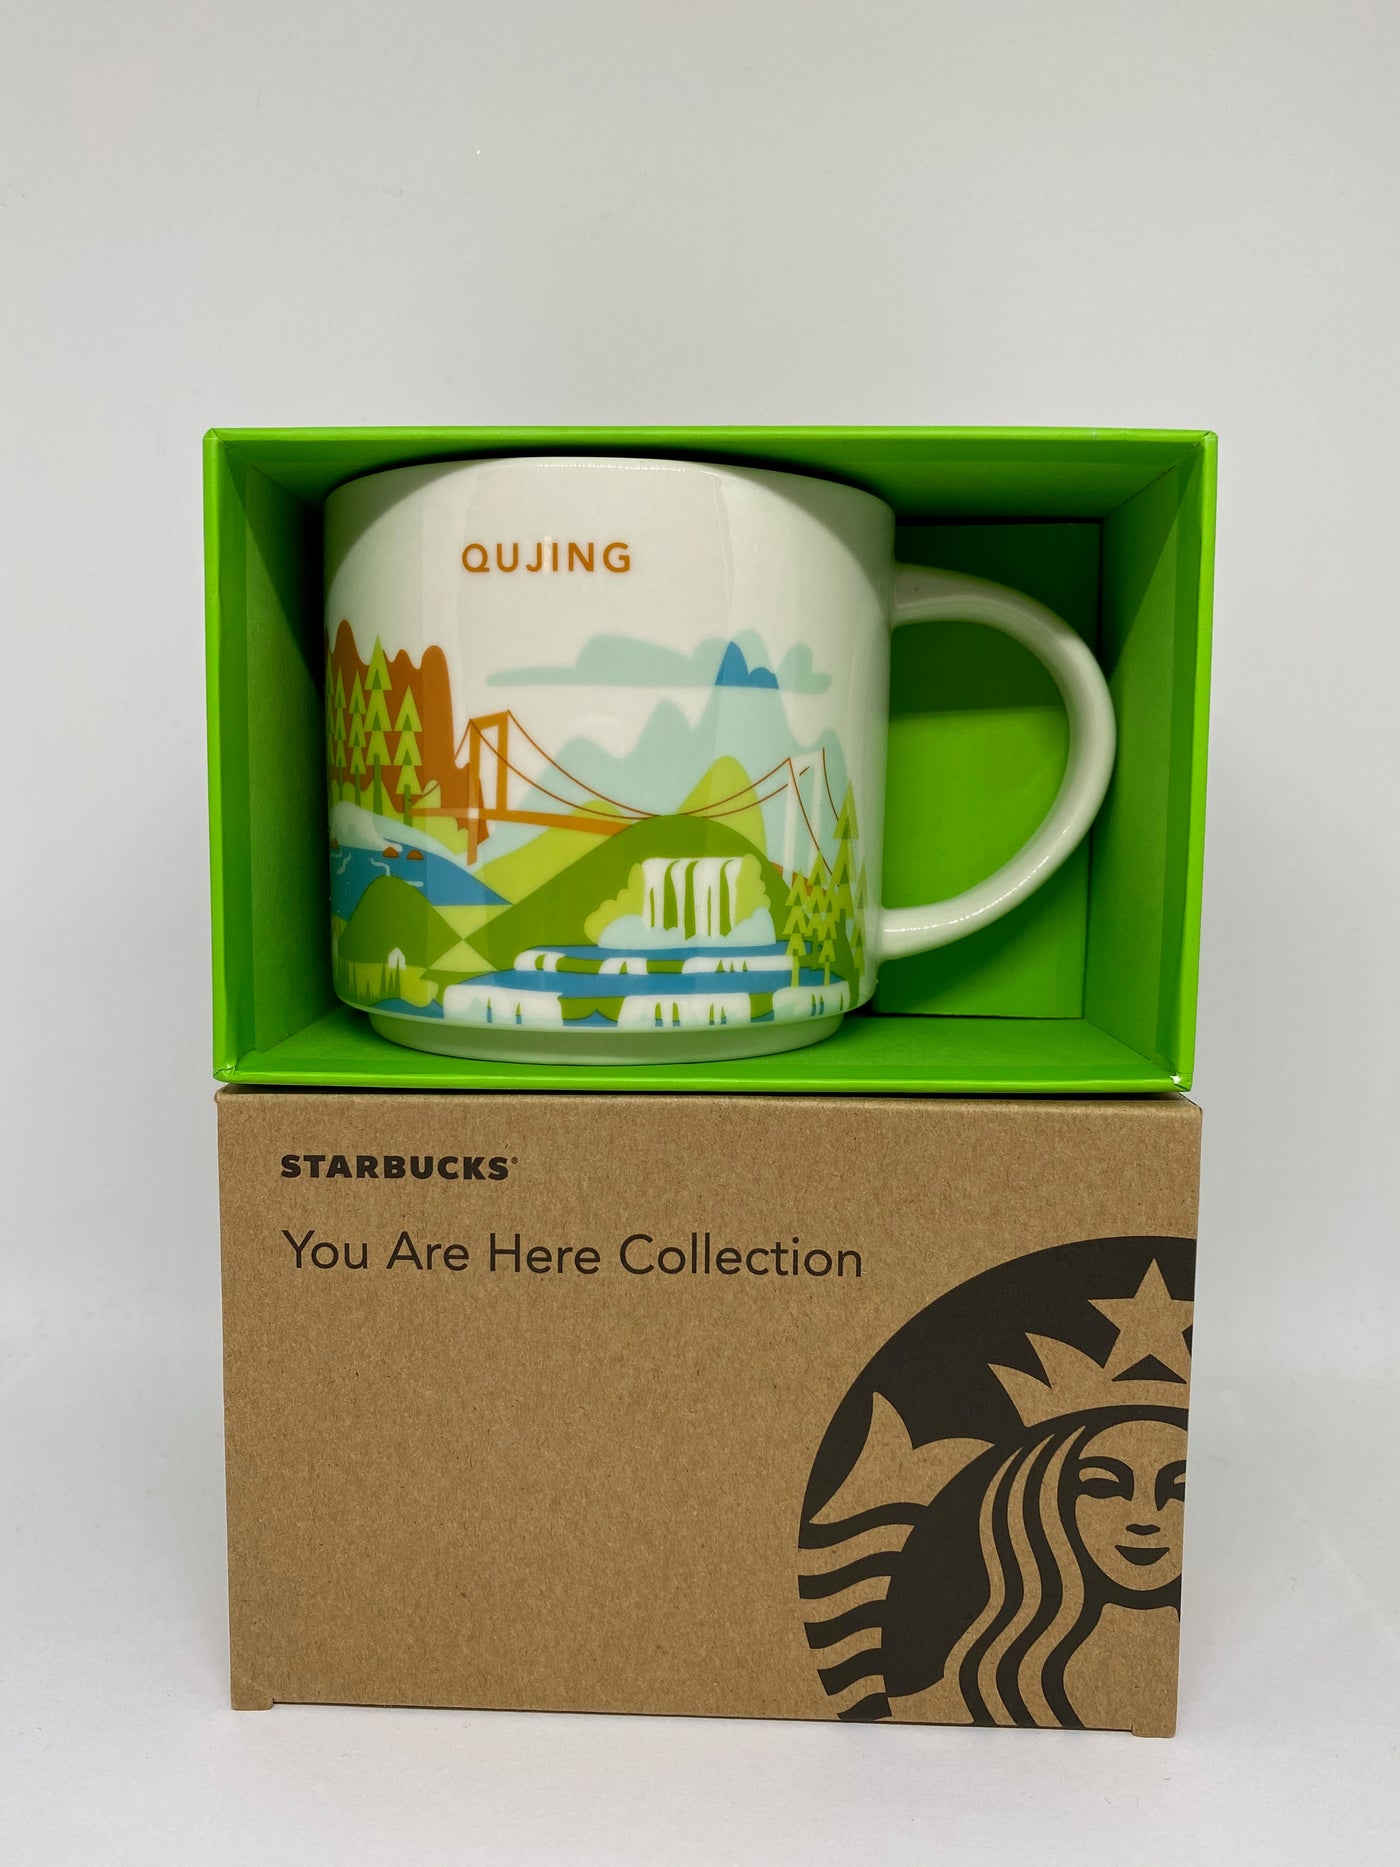 Starbucks You Are Here Collection Qujing China Ceramic Coffee Mug New With Box